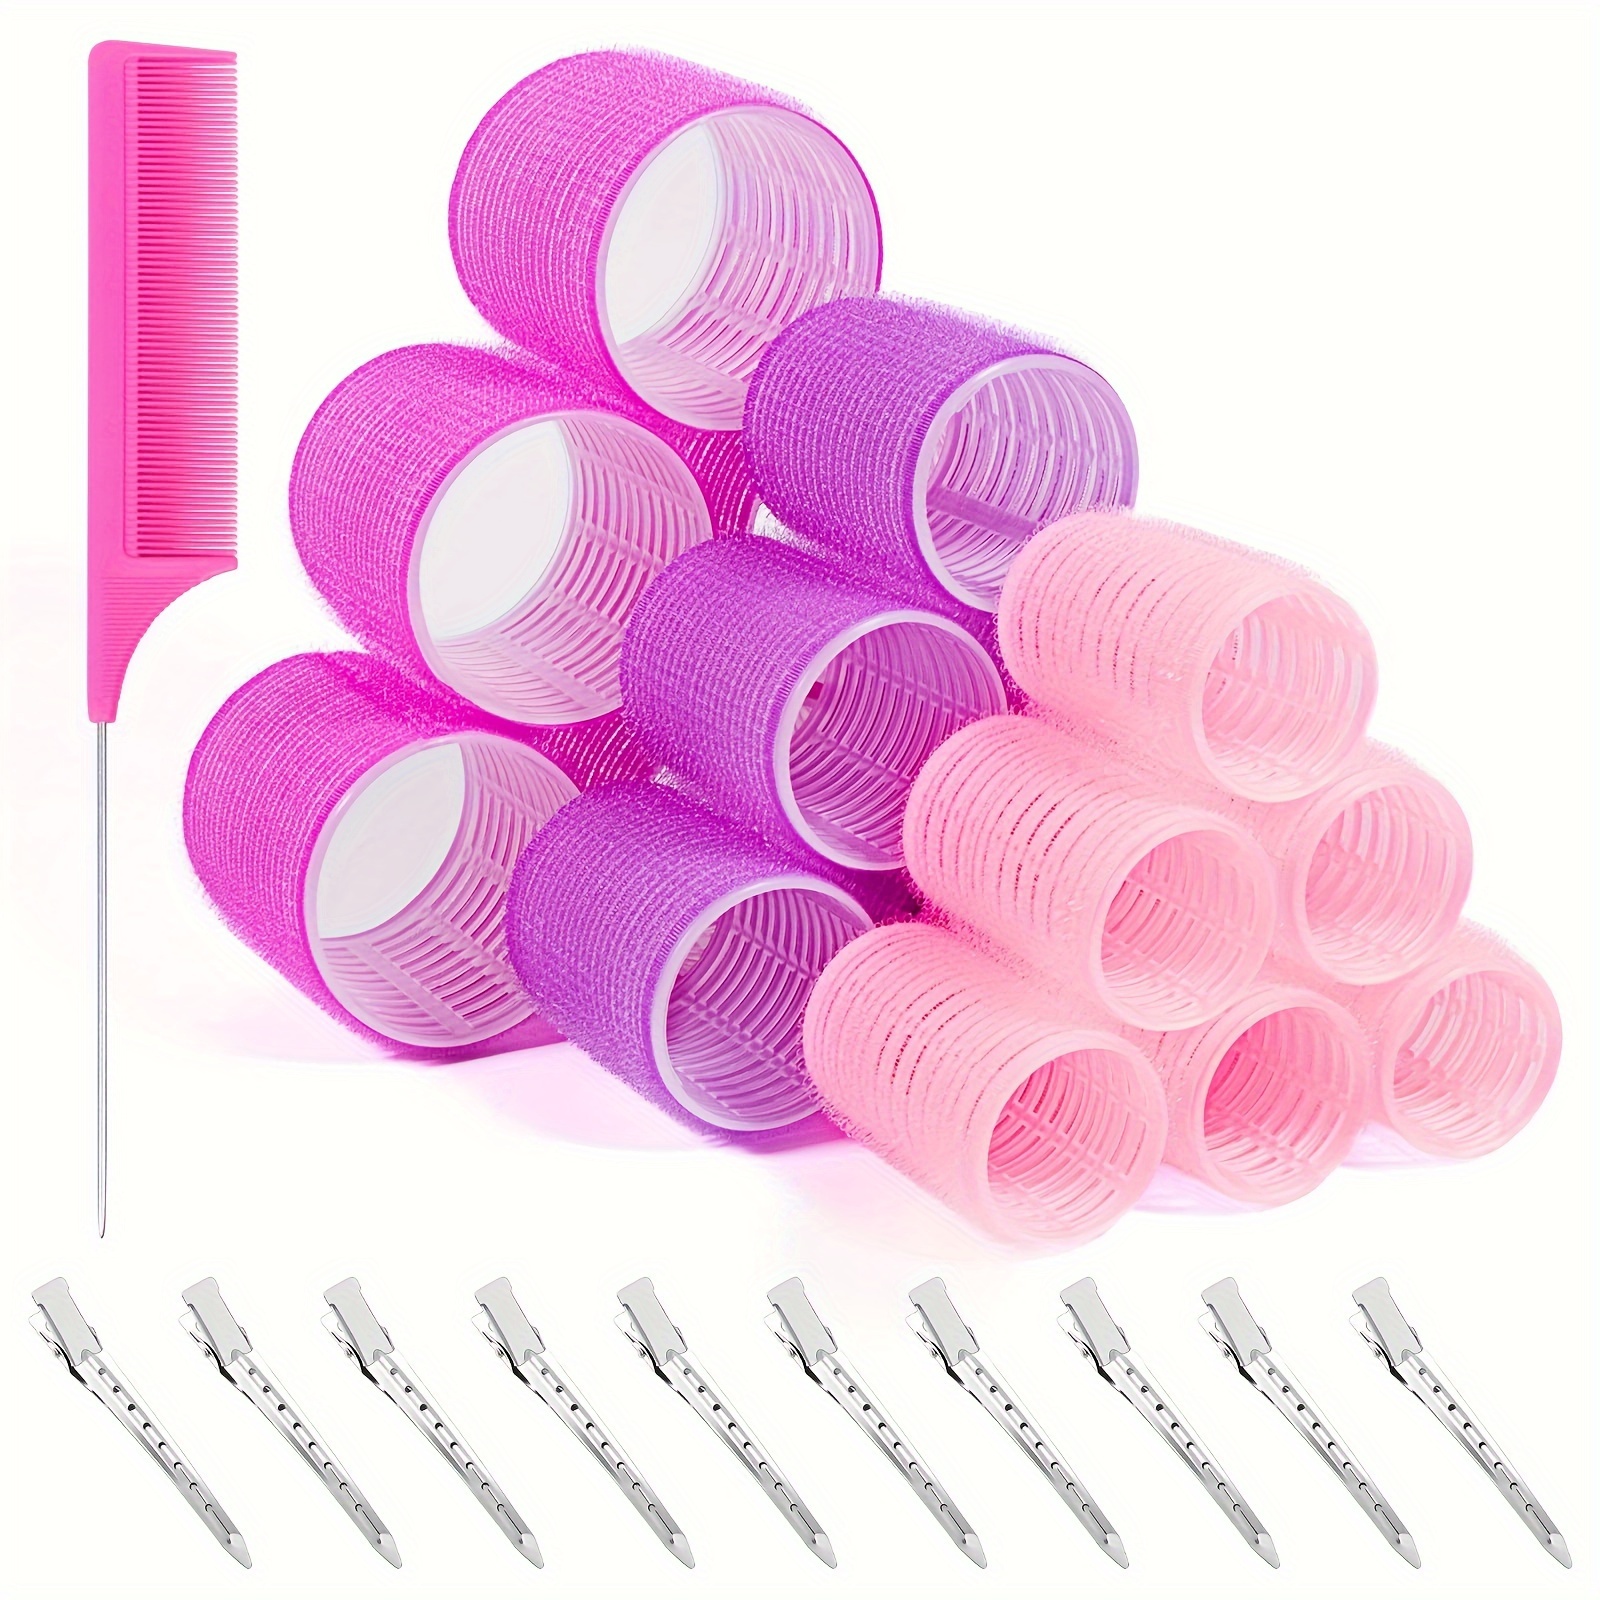 

29pcs Hair Styling Tools For Women And Girls Heatless Hair Curling Rollers Fluffy Hair Root Tools Hair Side Clips